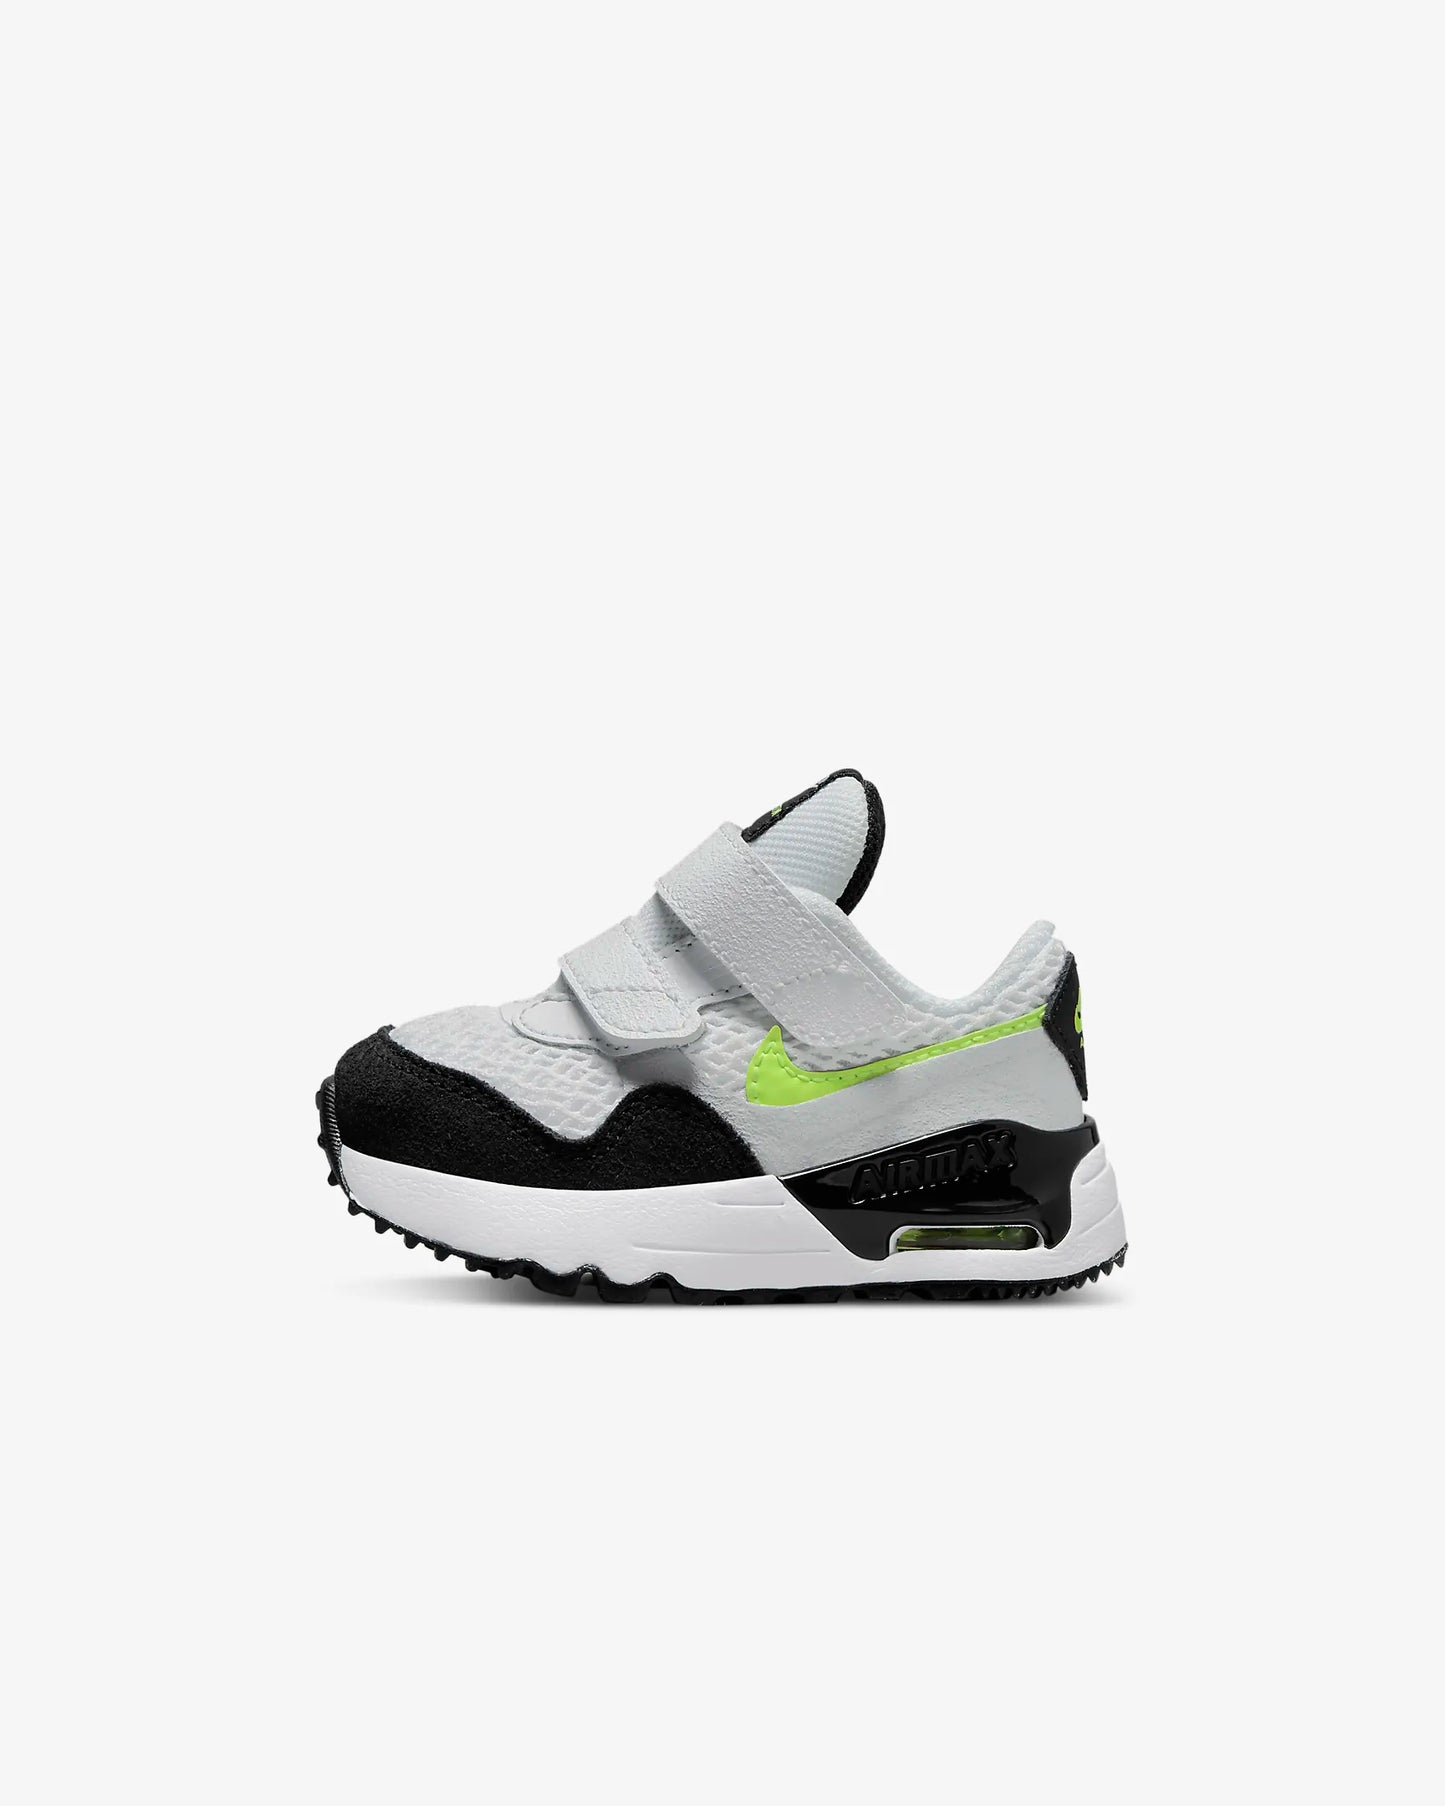 .Nike Air Max SYSTM Baby/Toddler Shoes - (DQ0286 100) - AS - R1L9